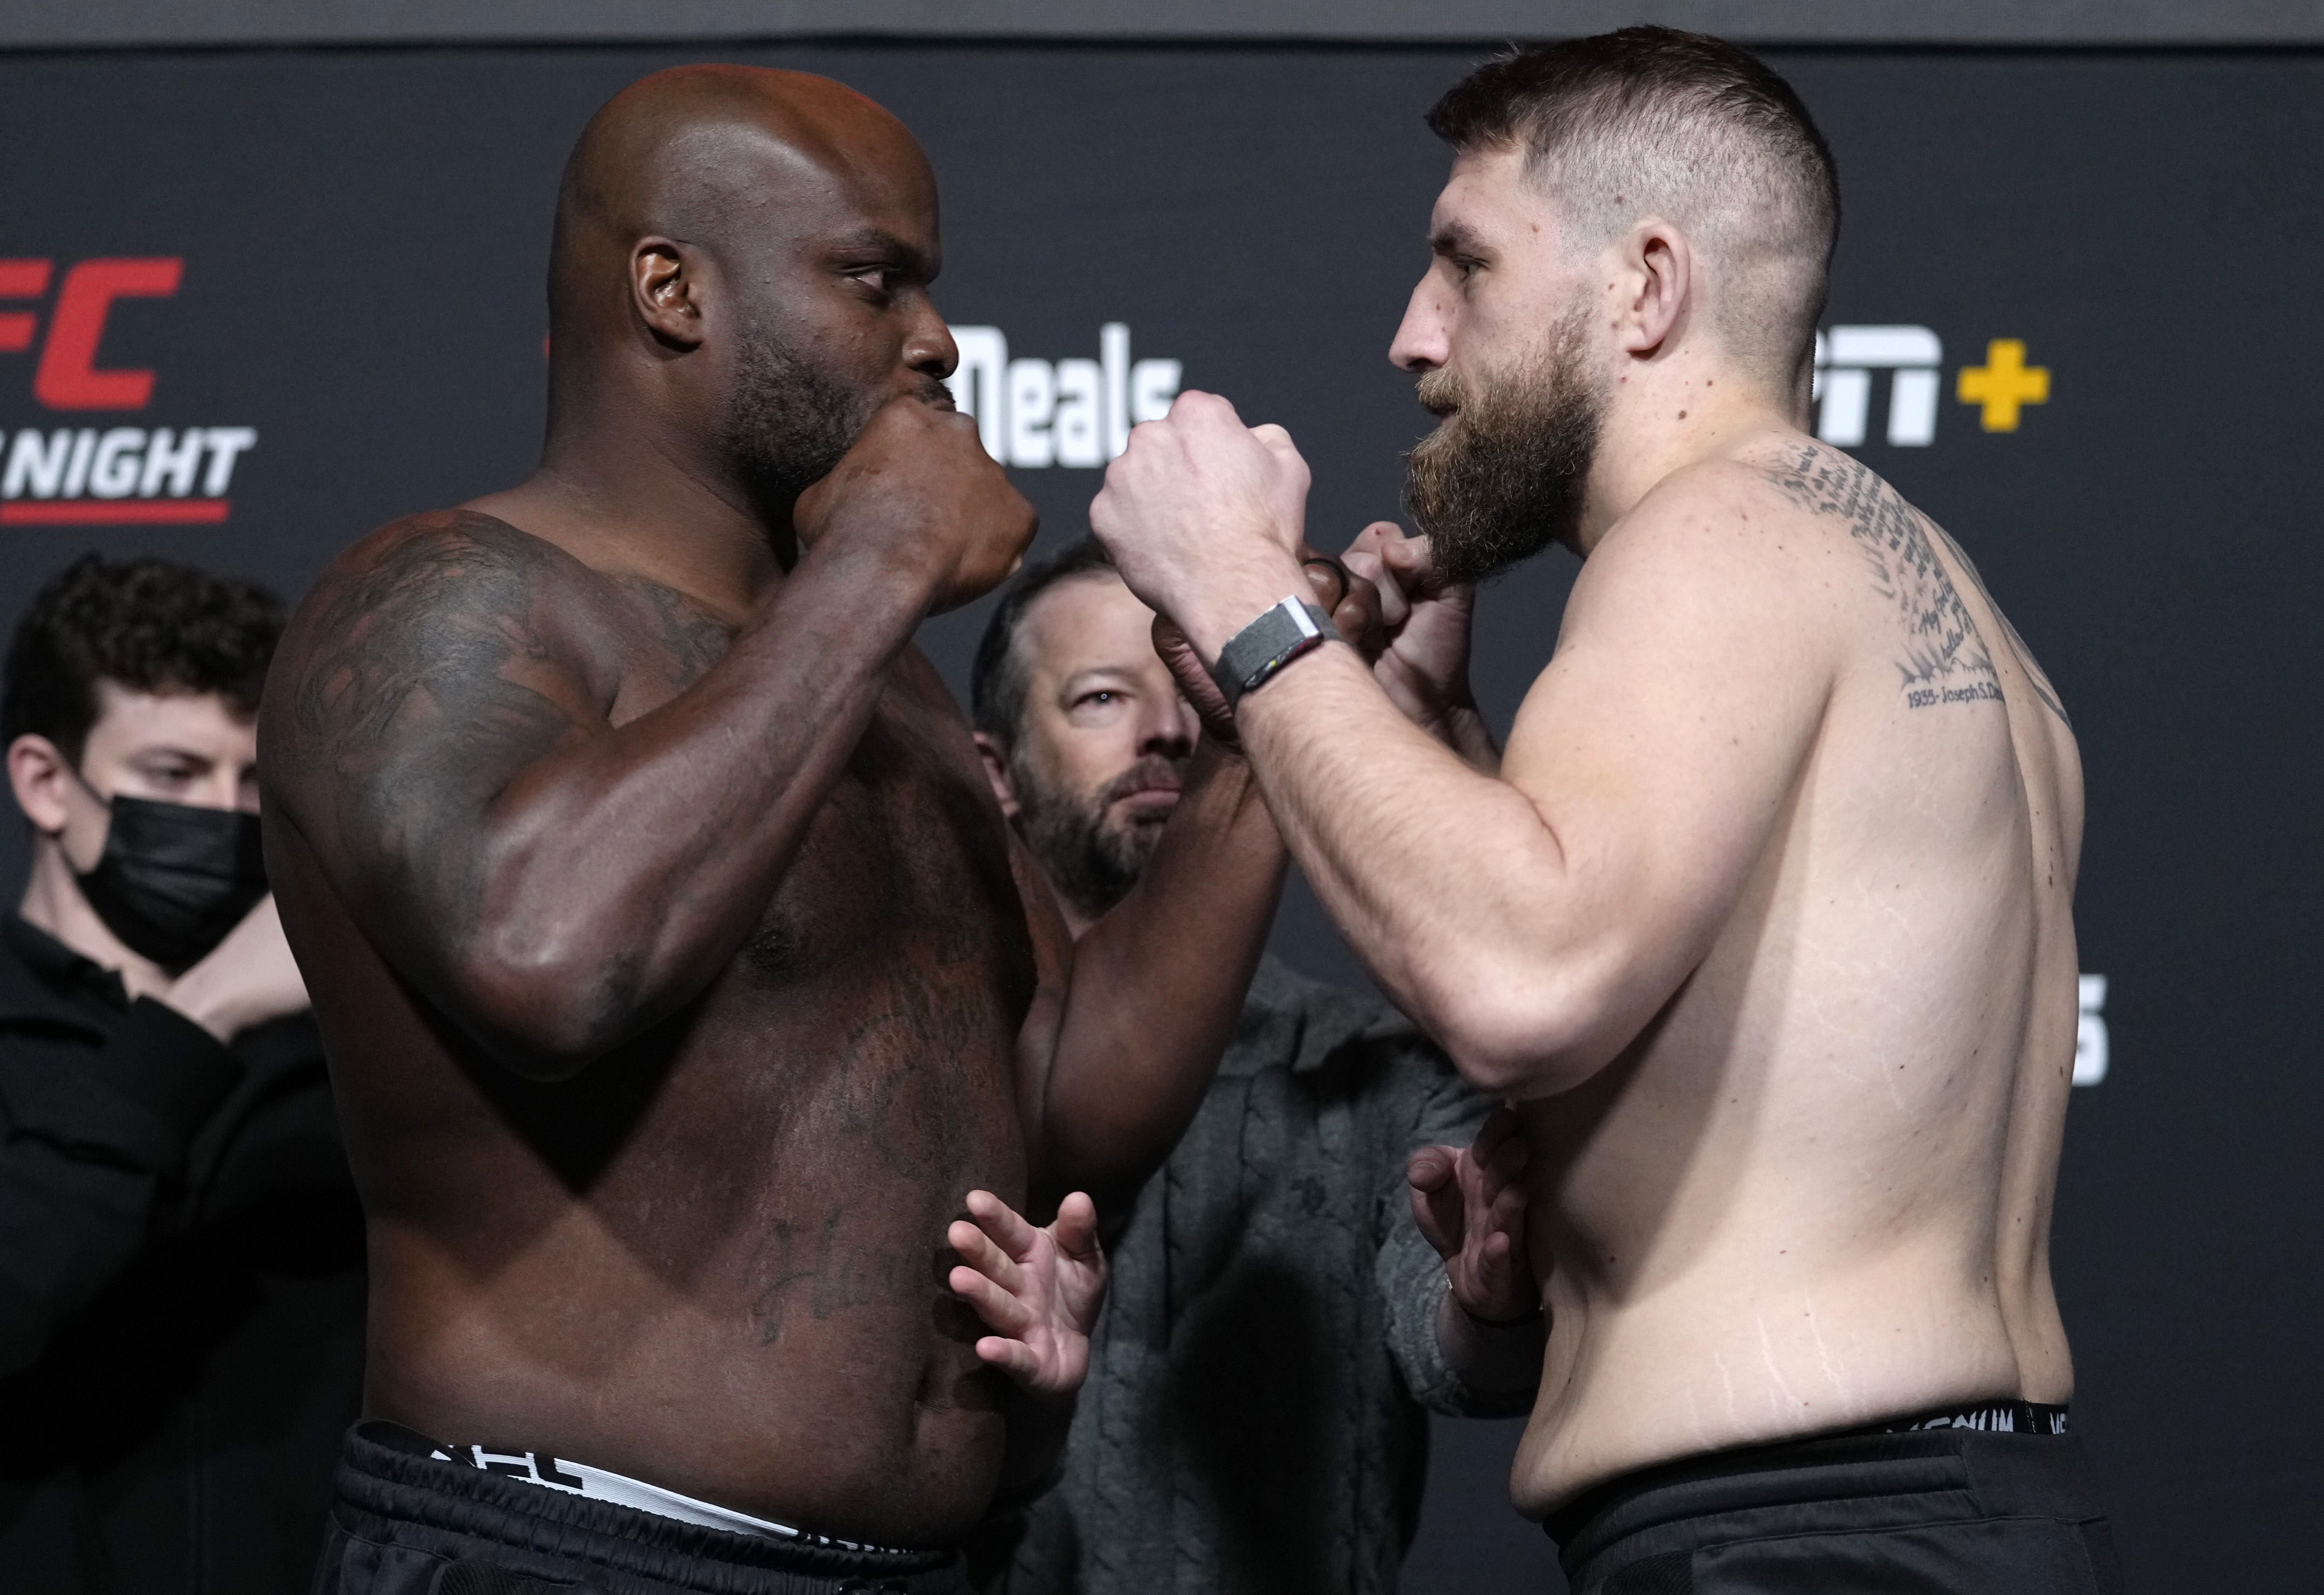 Derrick Lewis holds UFC knockout record with first round finish of Chris  Daukaus